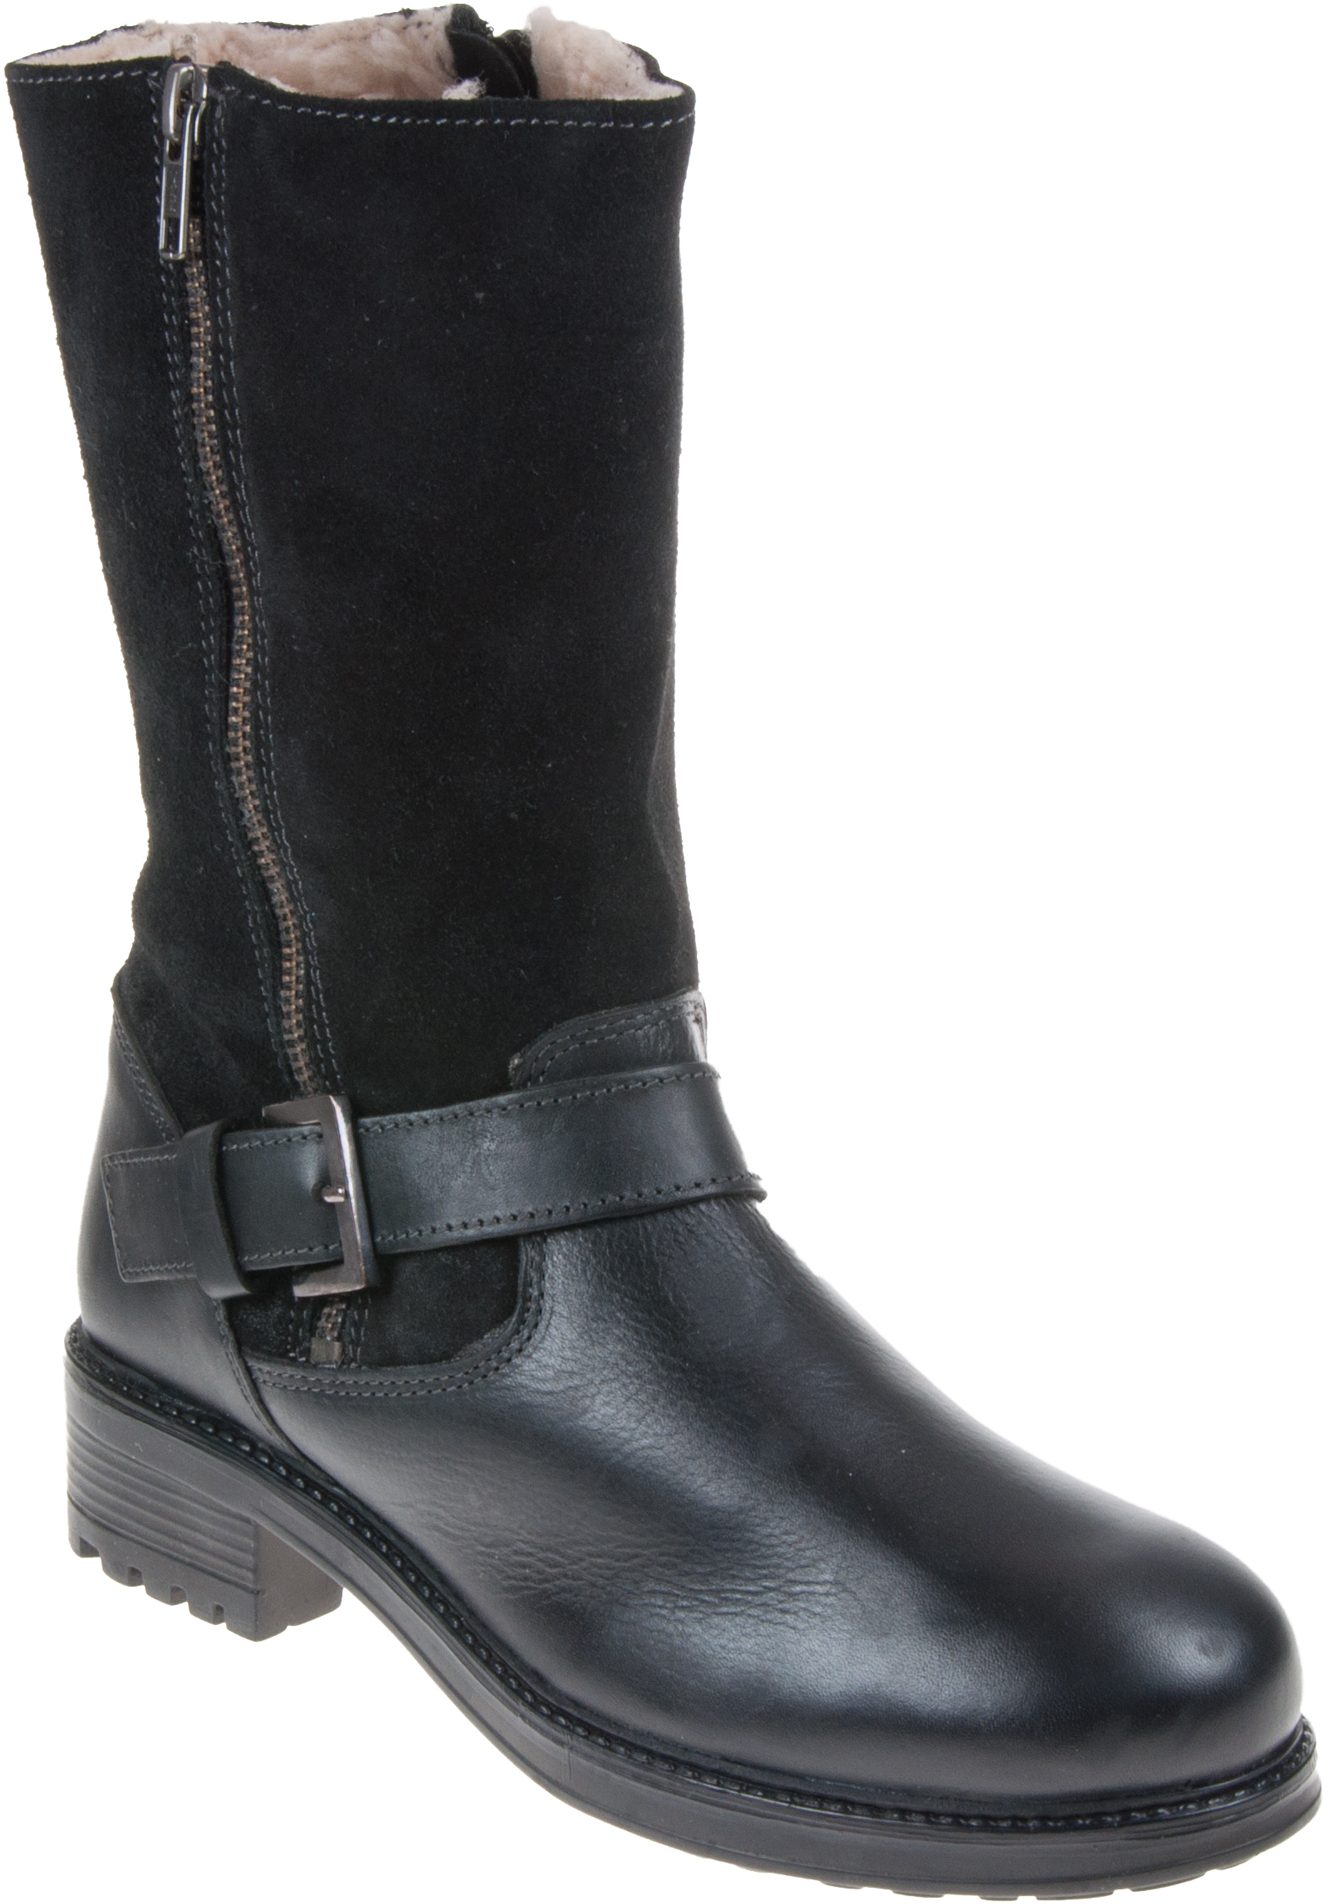 Adesso Jess Black 03512 - Calf Boots - Humphries Shoes